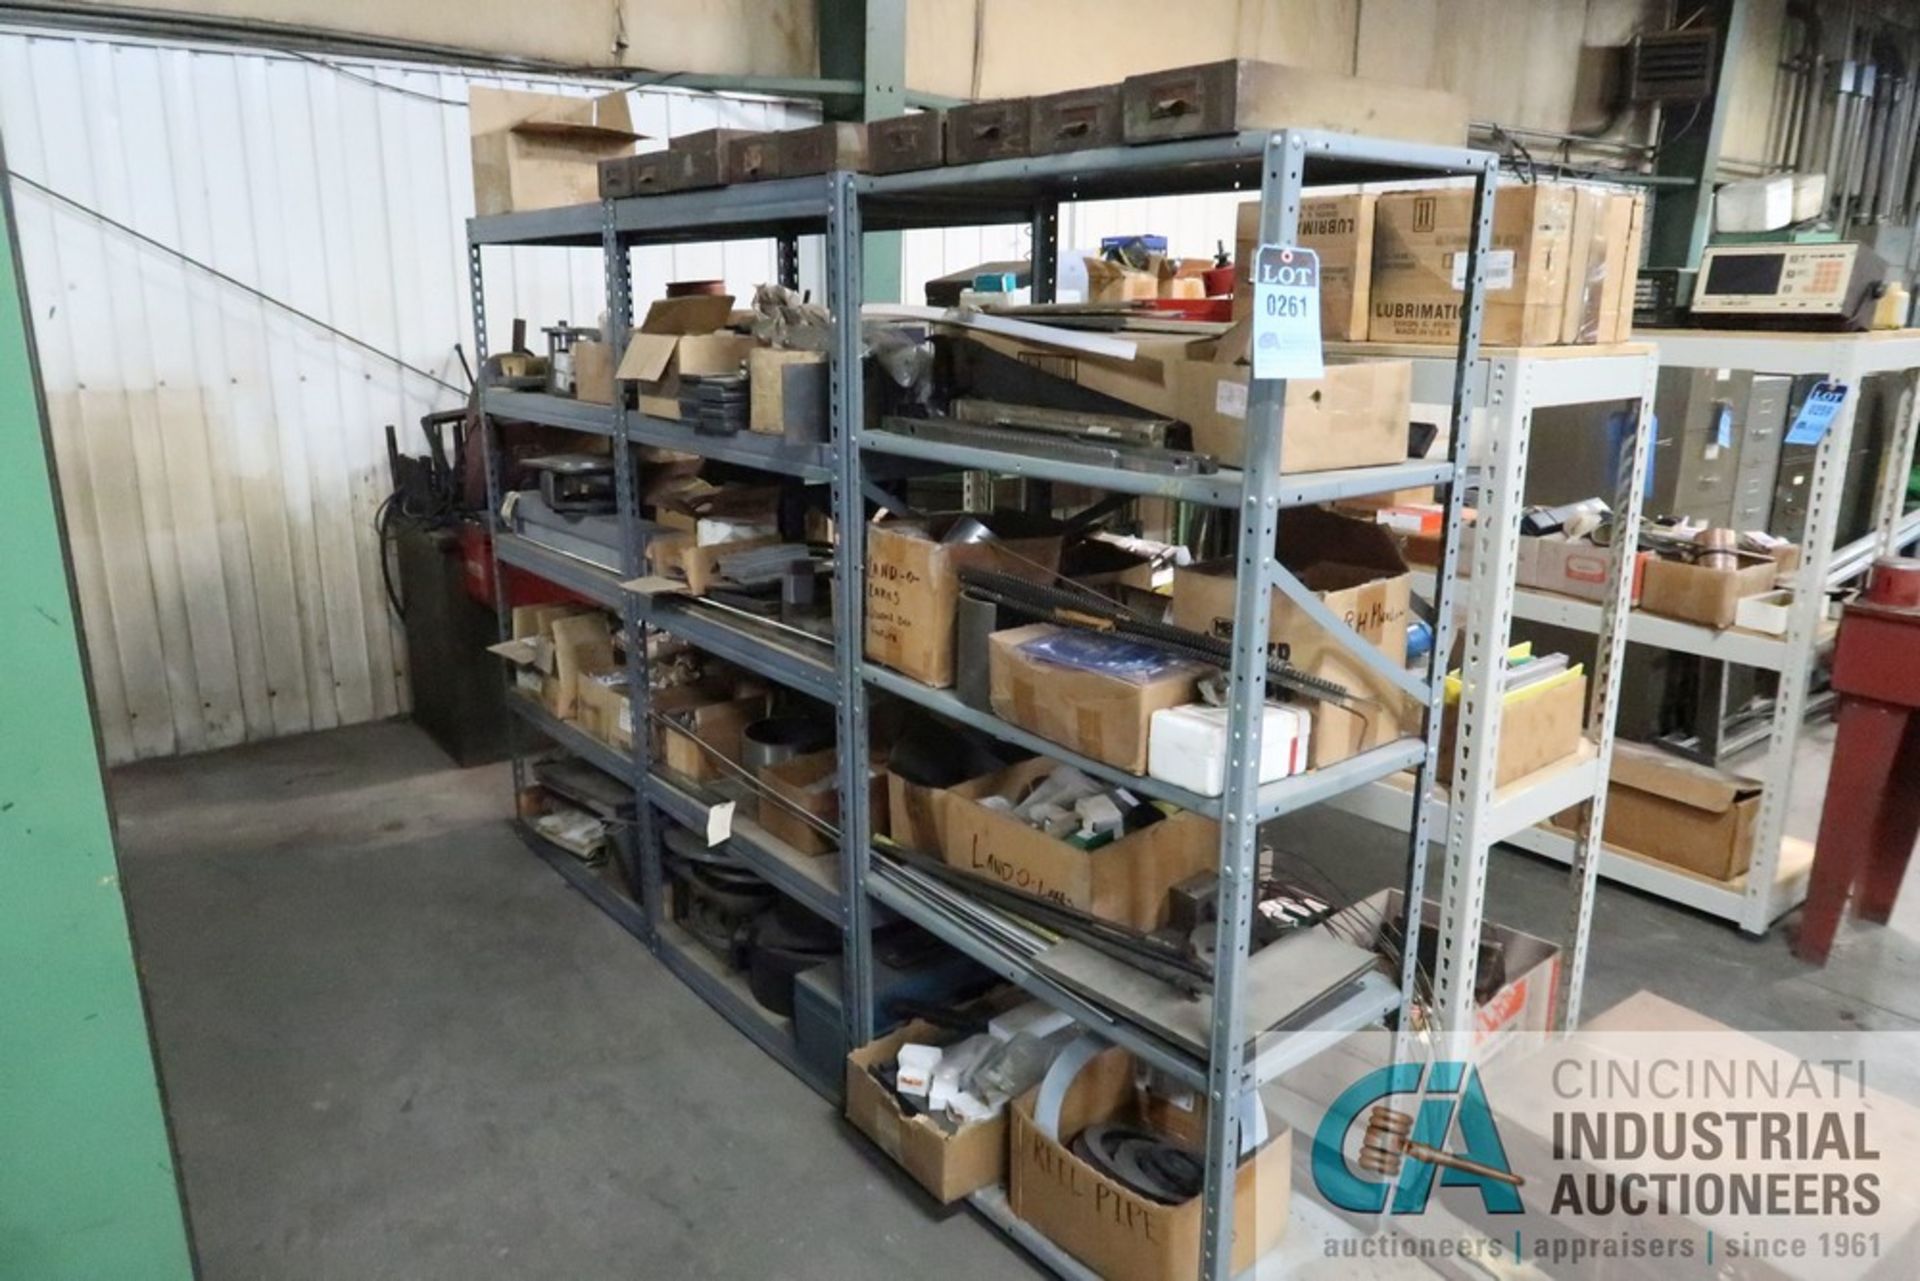 36" X 18" X 72" STEEL SHELVES WITH MISCELLANEOUS MACHINE PARTS, TOOLING, FIXTURES